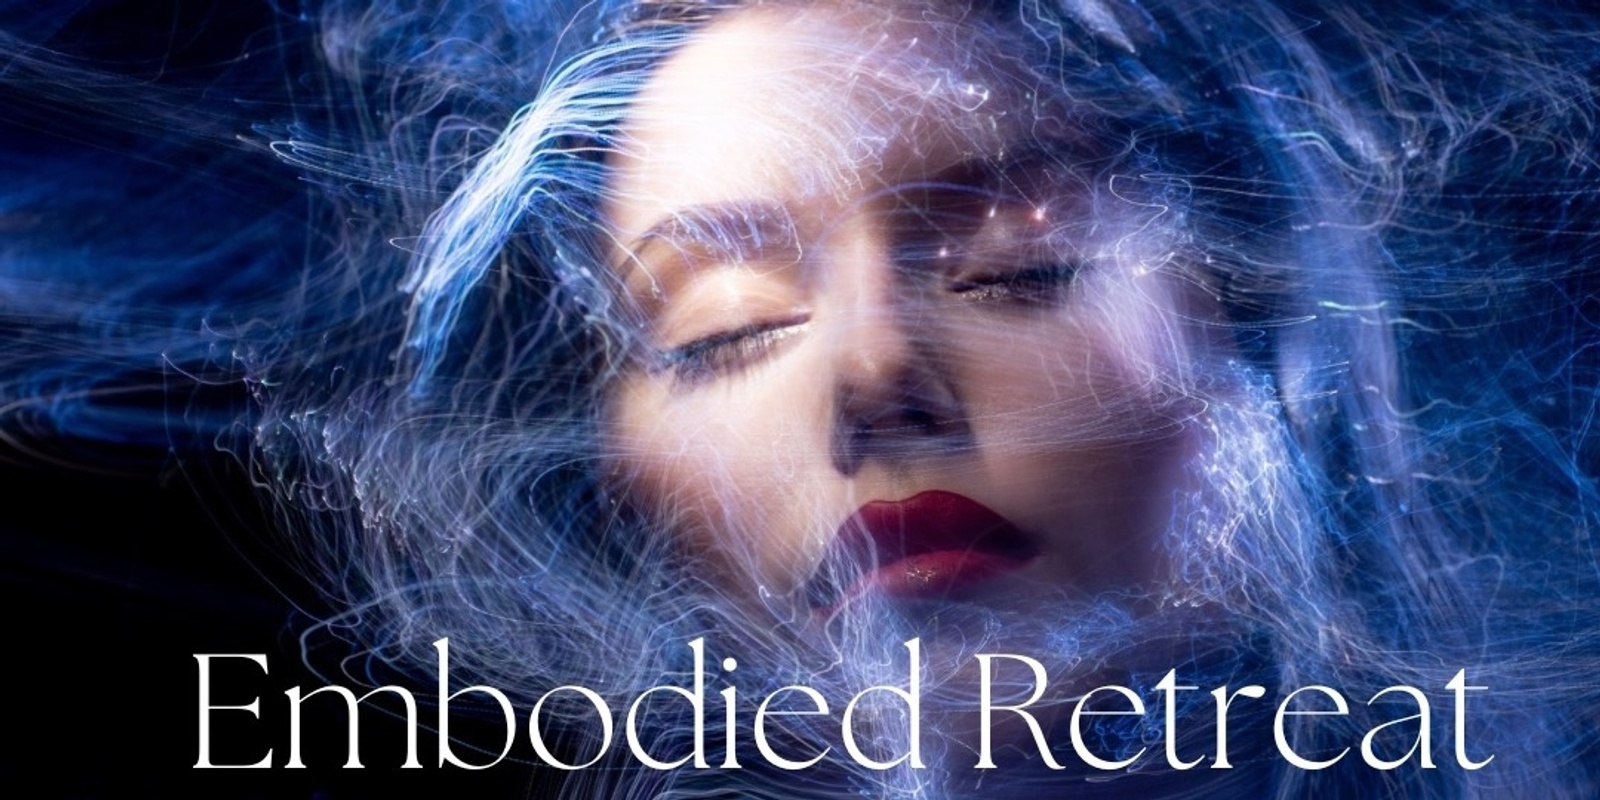 Banner image for “Embodied” 1 Day Retreat  | Women’s Circles, Somatic Healing & Sound Immersion